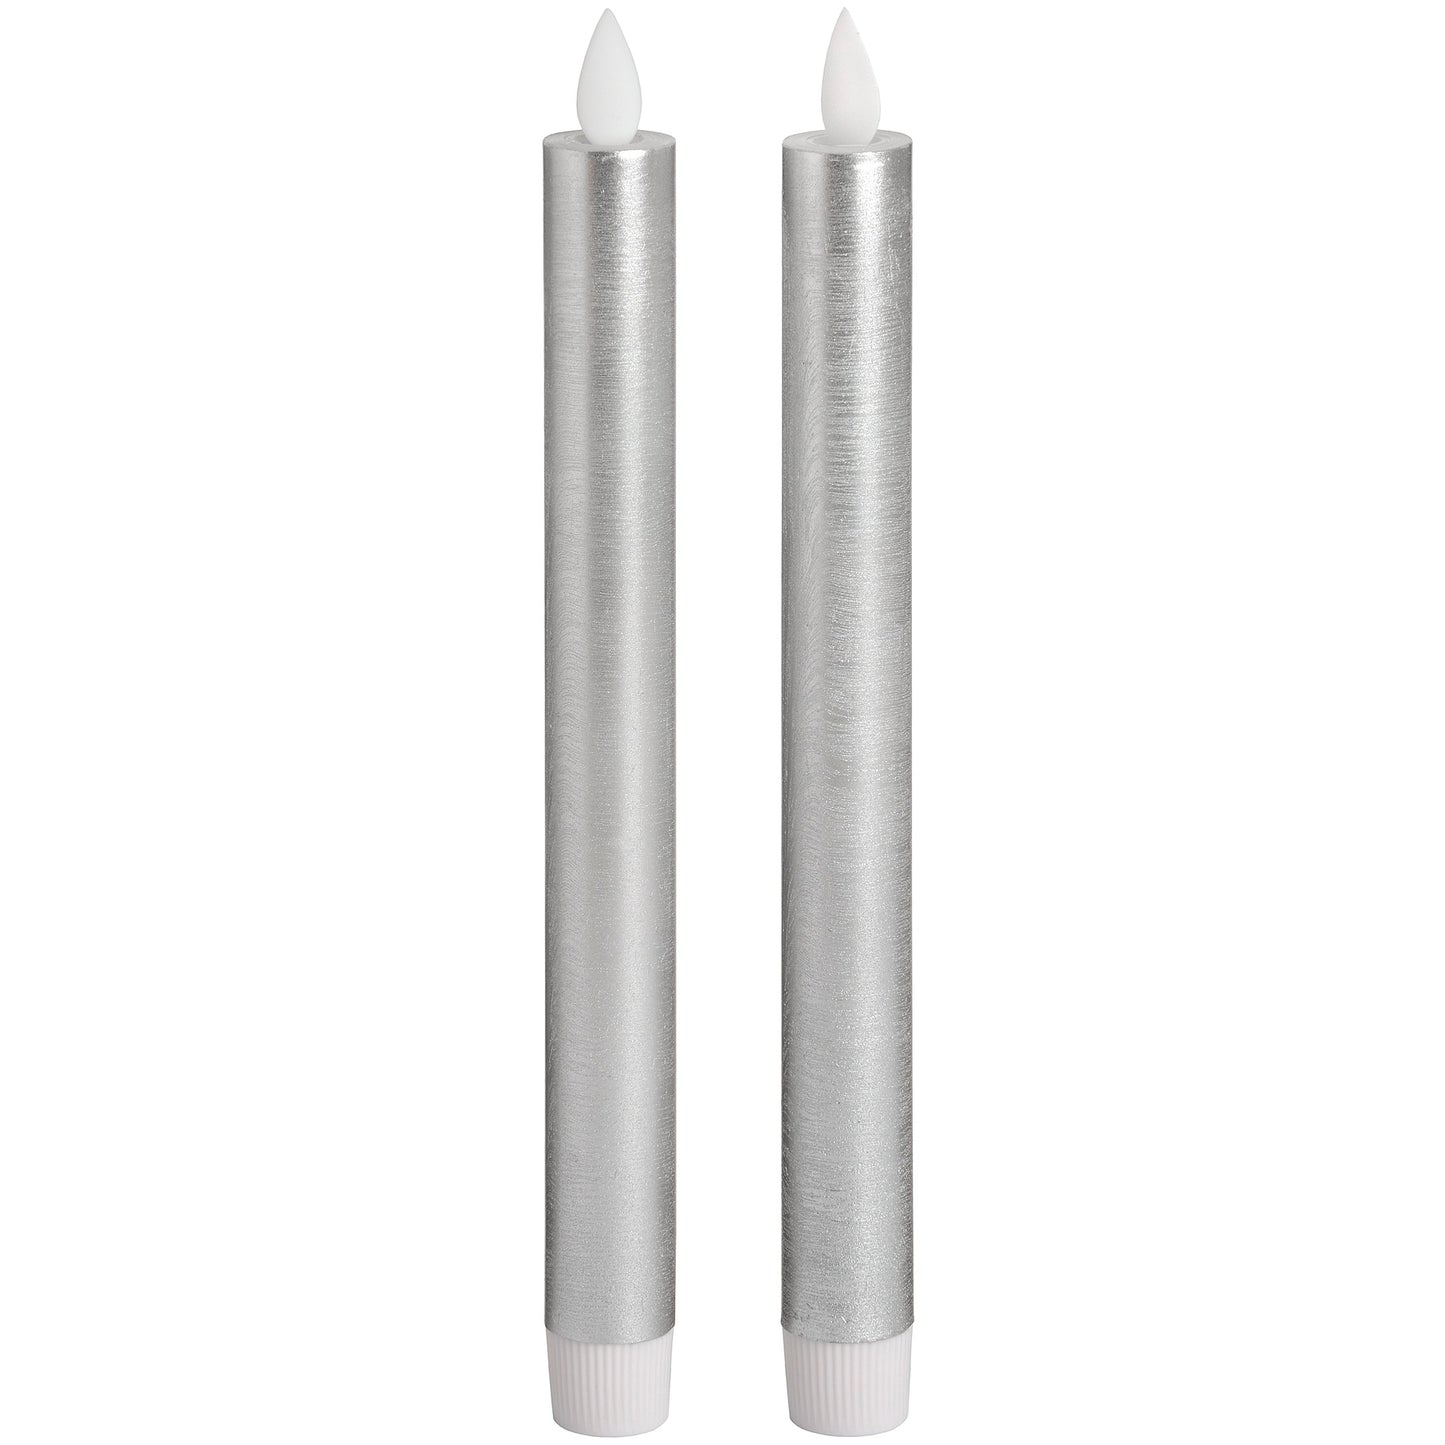 Pair of Silver Luxe Flickering Flame LED Wax Dinner Candles